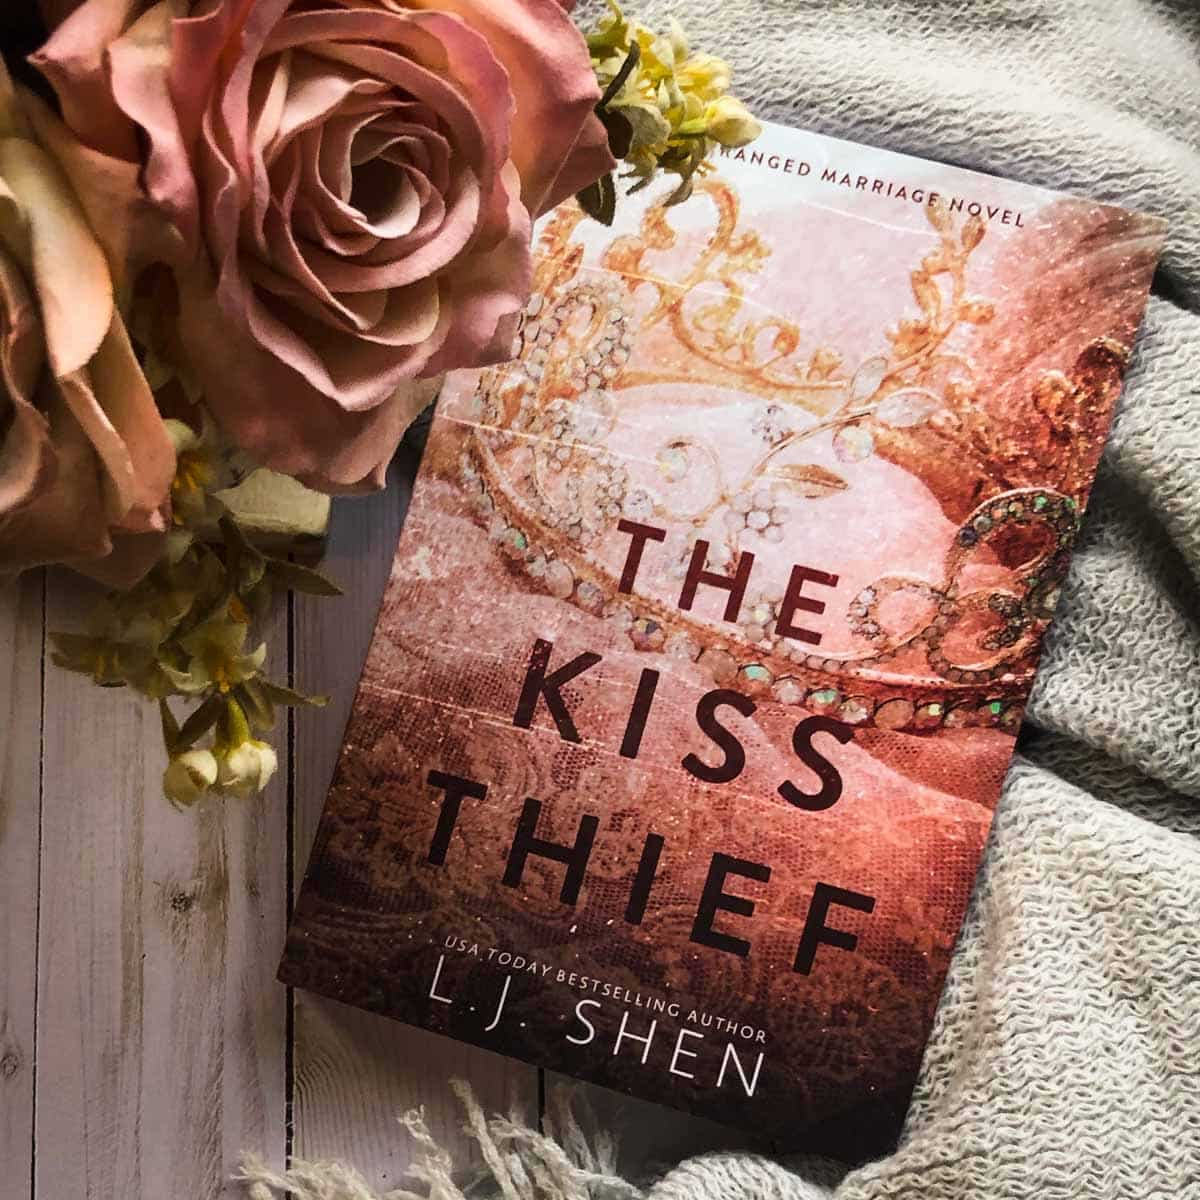 The Kiss Thief by LJ Shen is an addictive and angst-filled mafia romance that is guaranteed to be one-sitting-reading! Tautly written and intriguing, it's got action, blackmail, revenge, and twists galore.